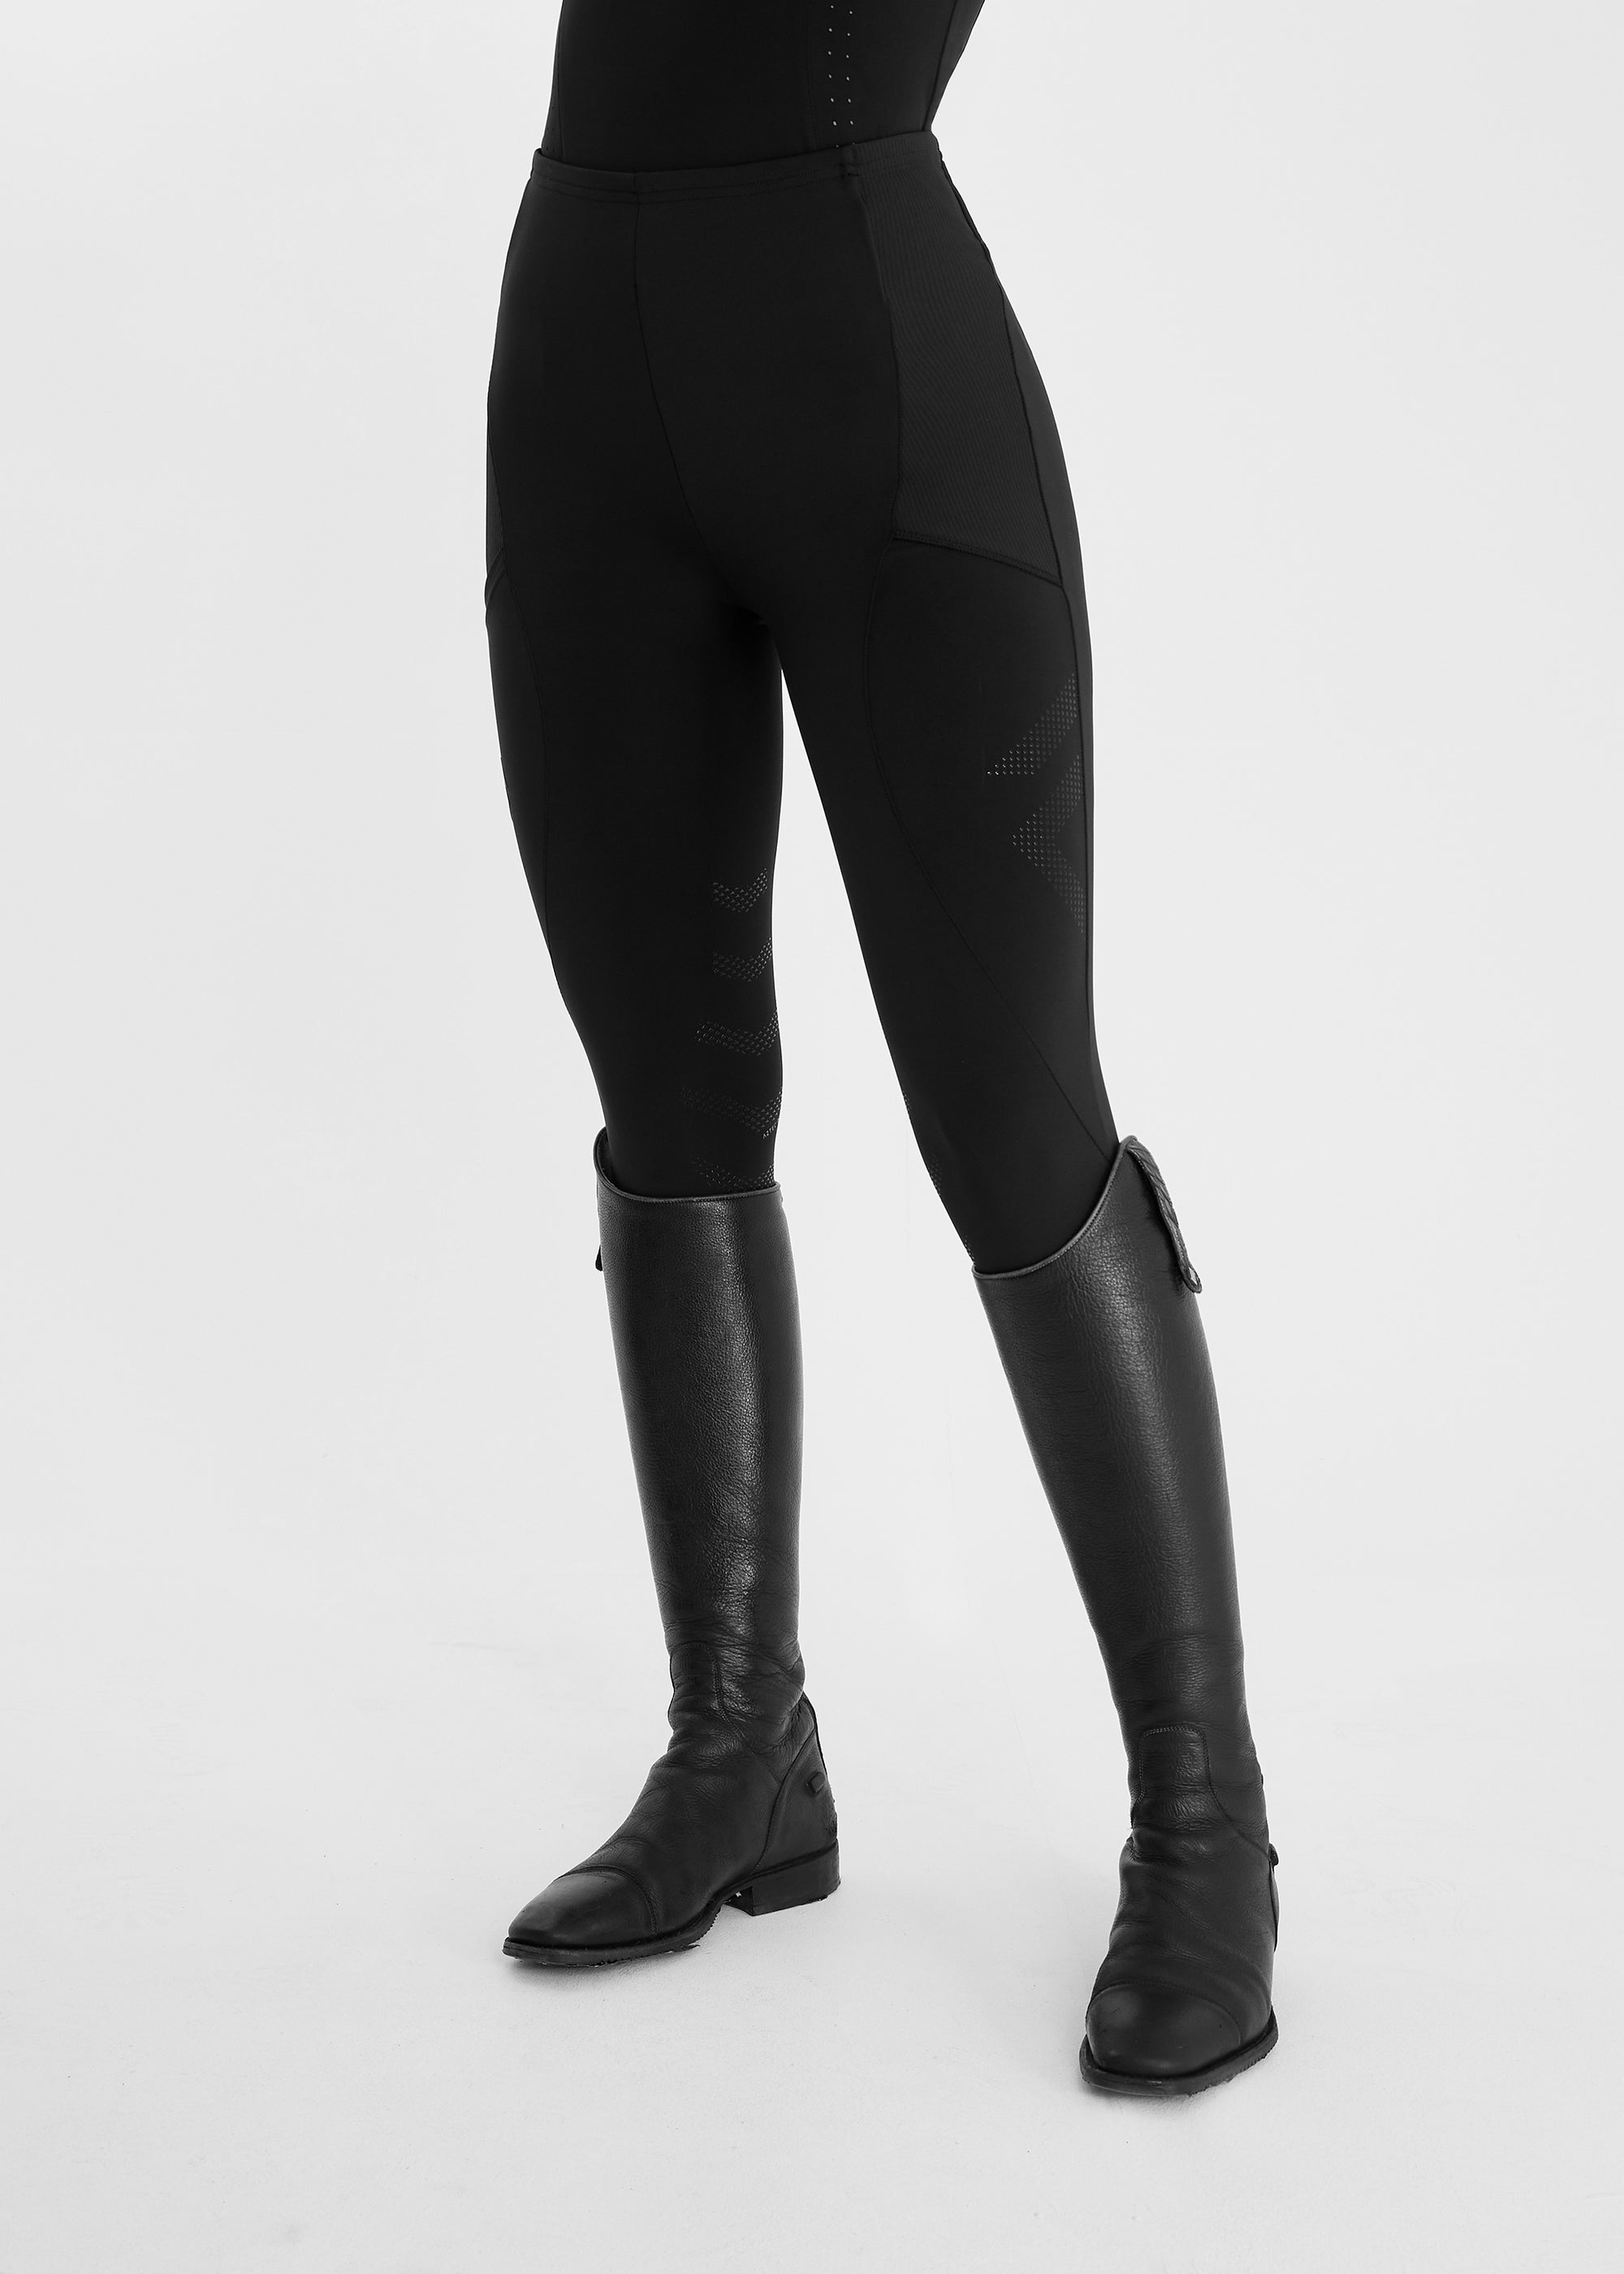 Gee Gee Equine Aztec Diamond Black Core Riding Leggings with Knee Patch: Comfortable Horse Riding Apparel